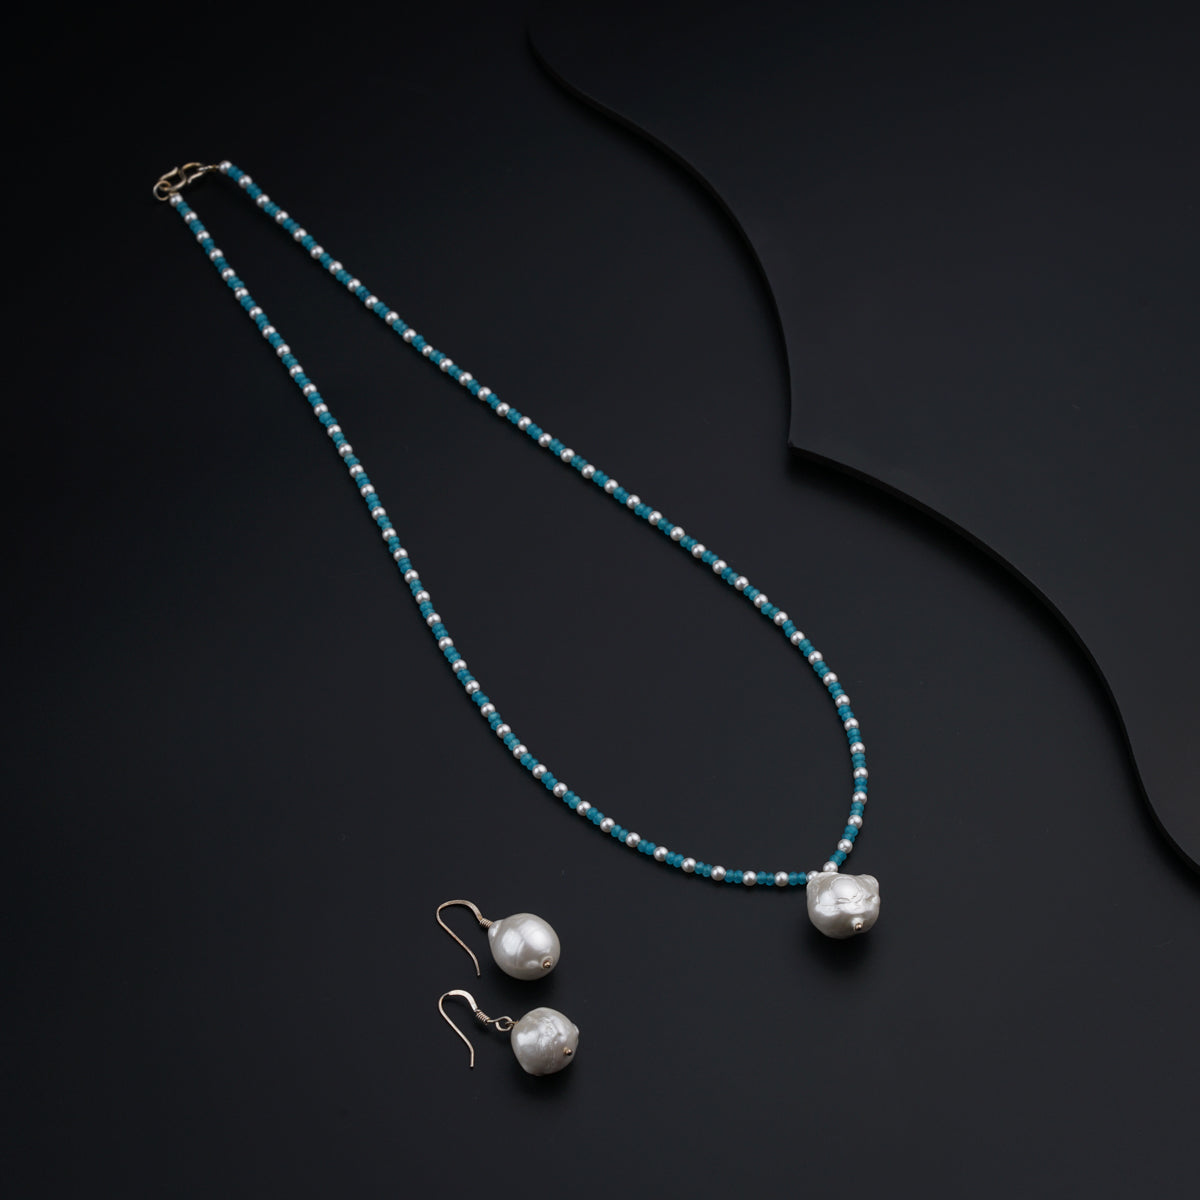 a necklace with pearls and a pair of earrings